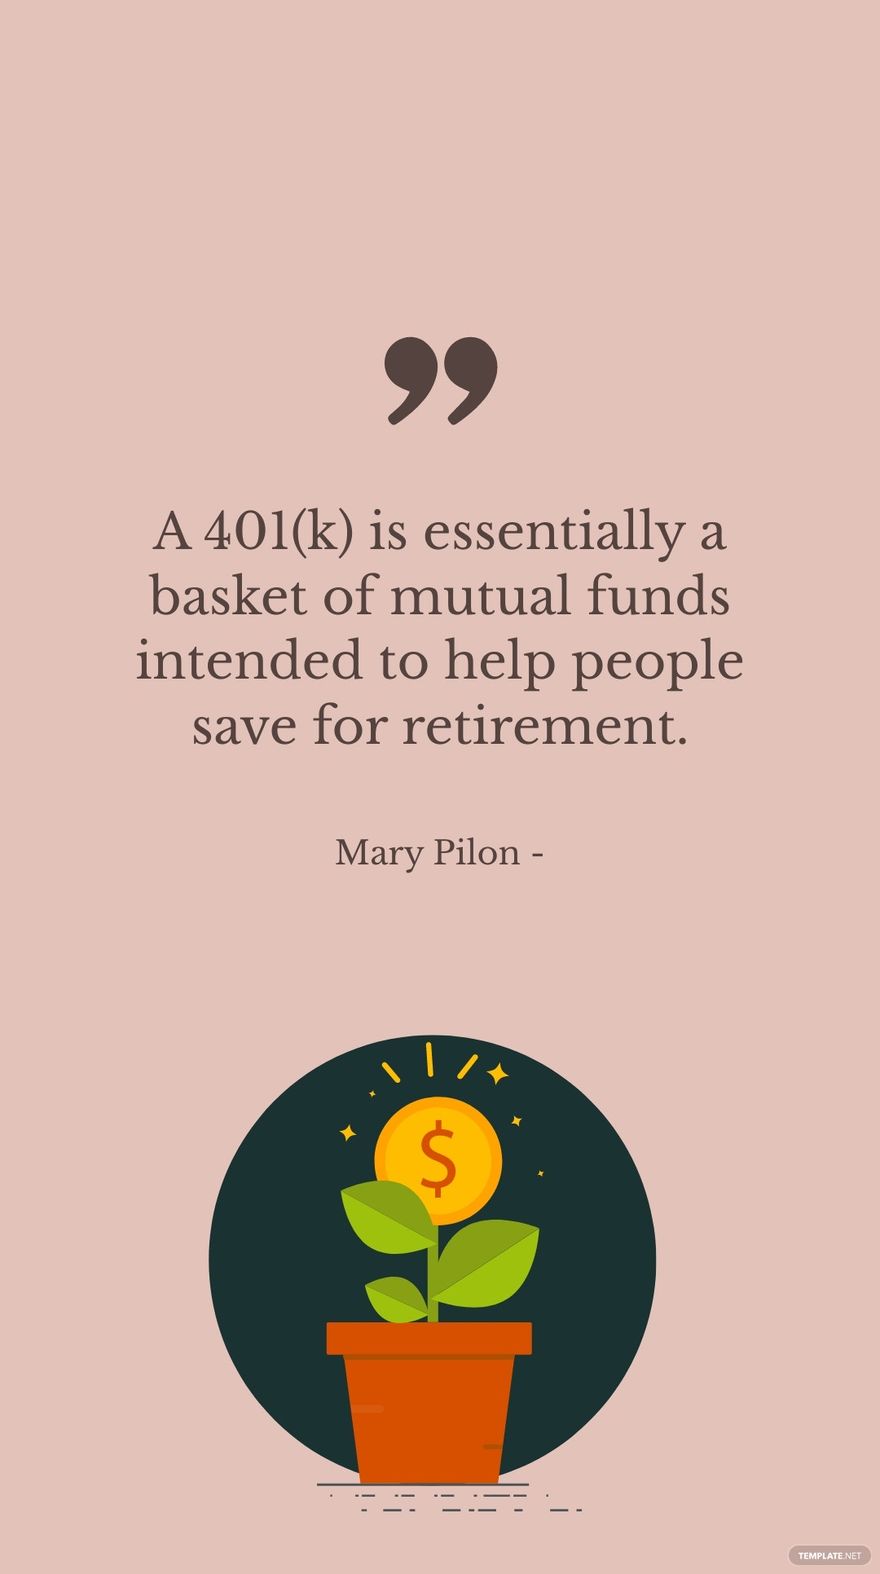 Free Mary Pilon - A 401(k) is essentially a basket of mutual funds intended to help people save for retirement.